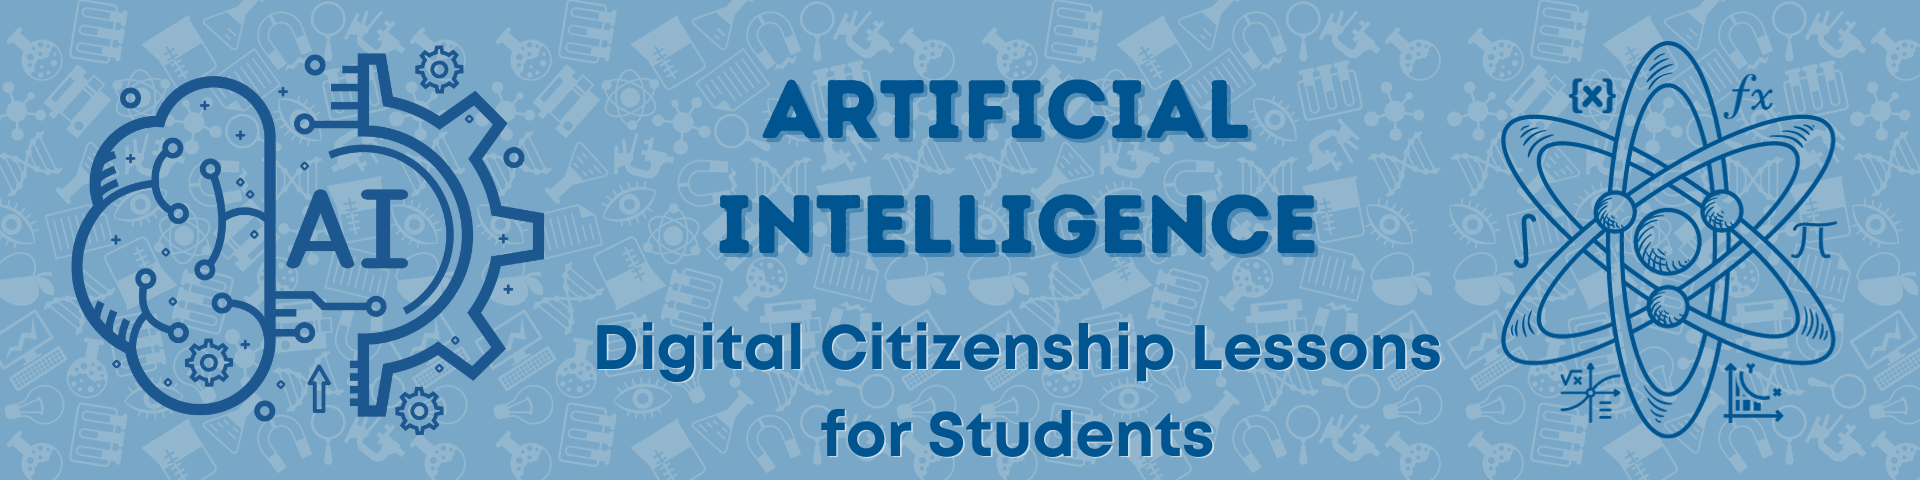 AI Digital Citizenship Lessons for Students